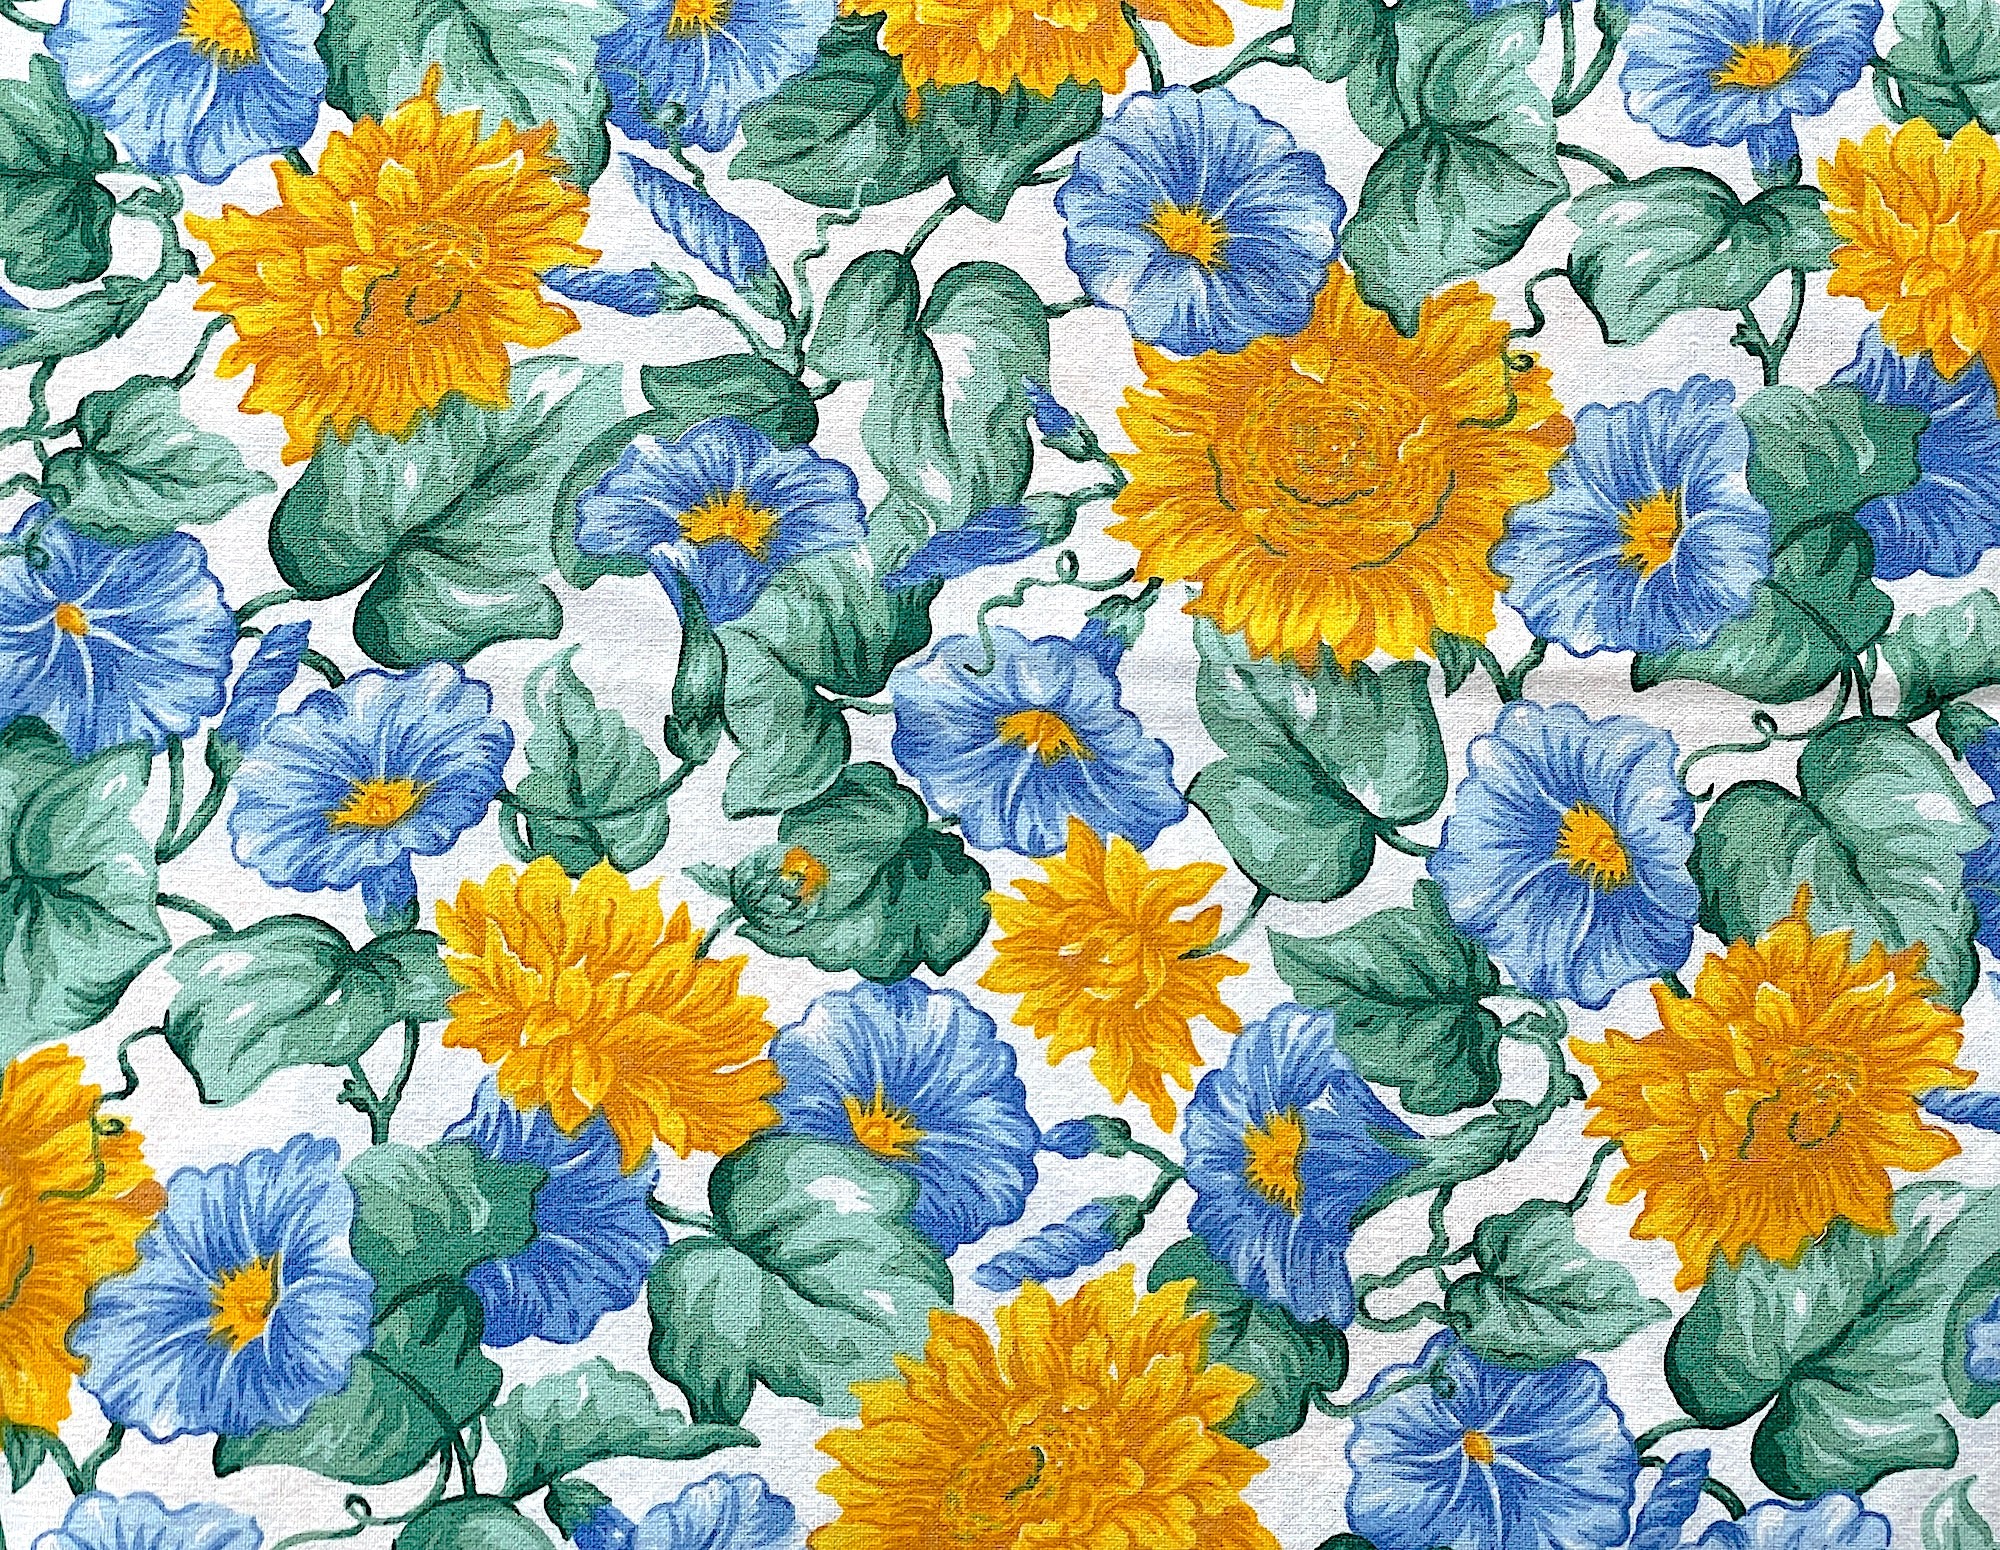 Yellow flowers surrounded by morning glories with the vine intertwined throughout the design.